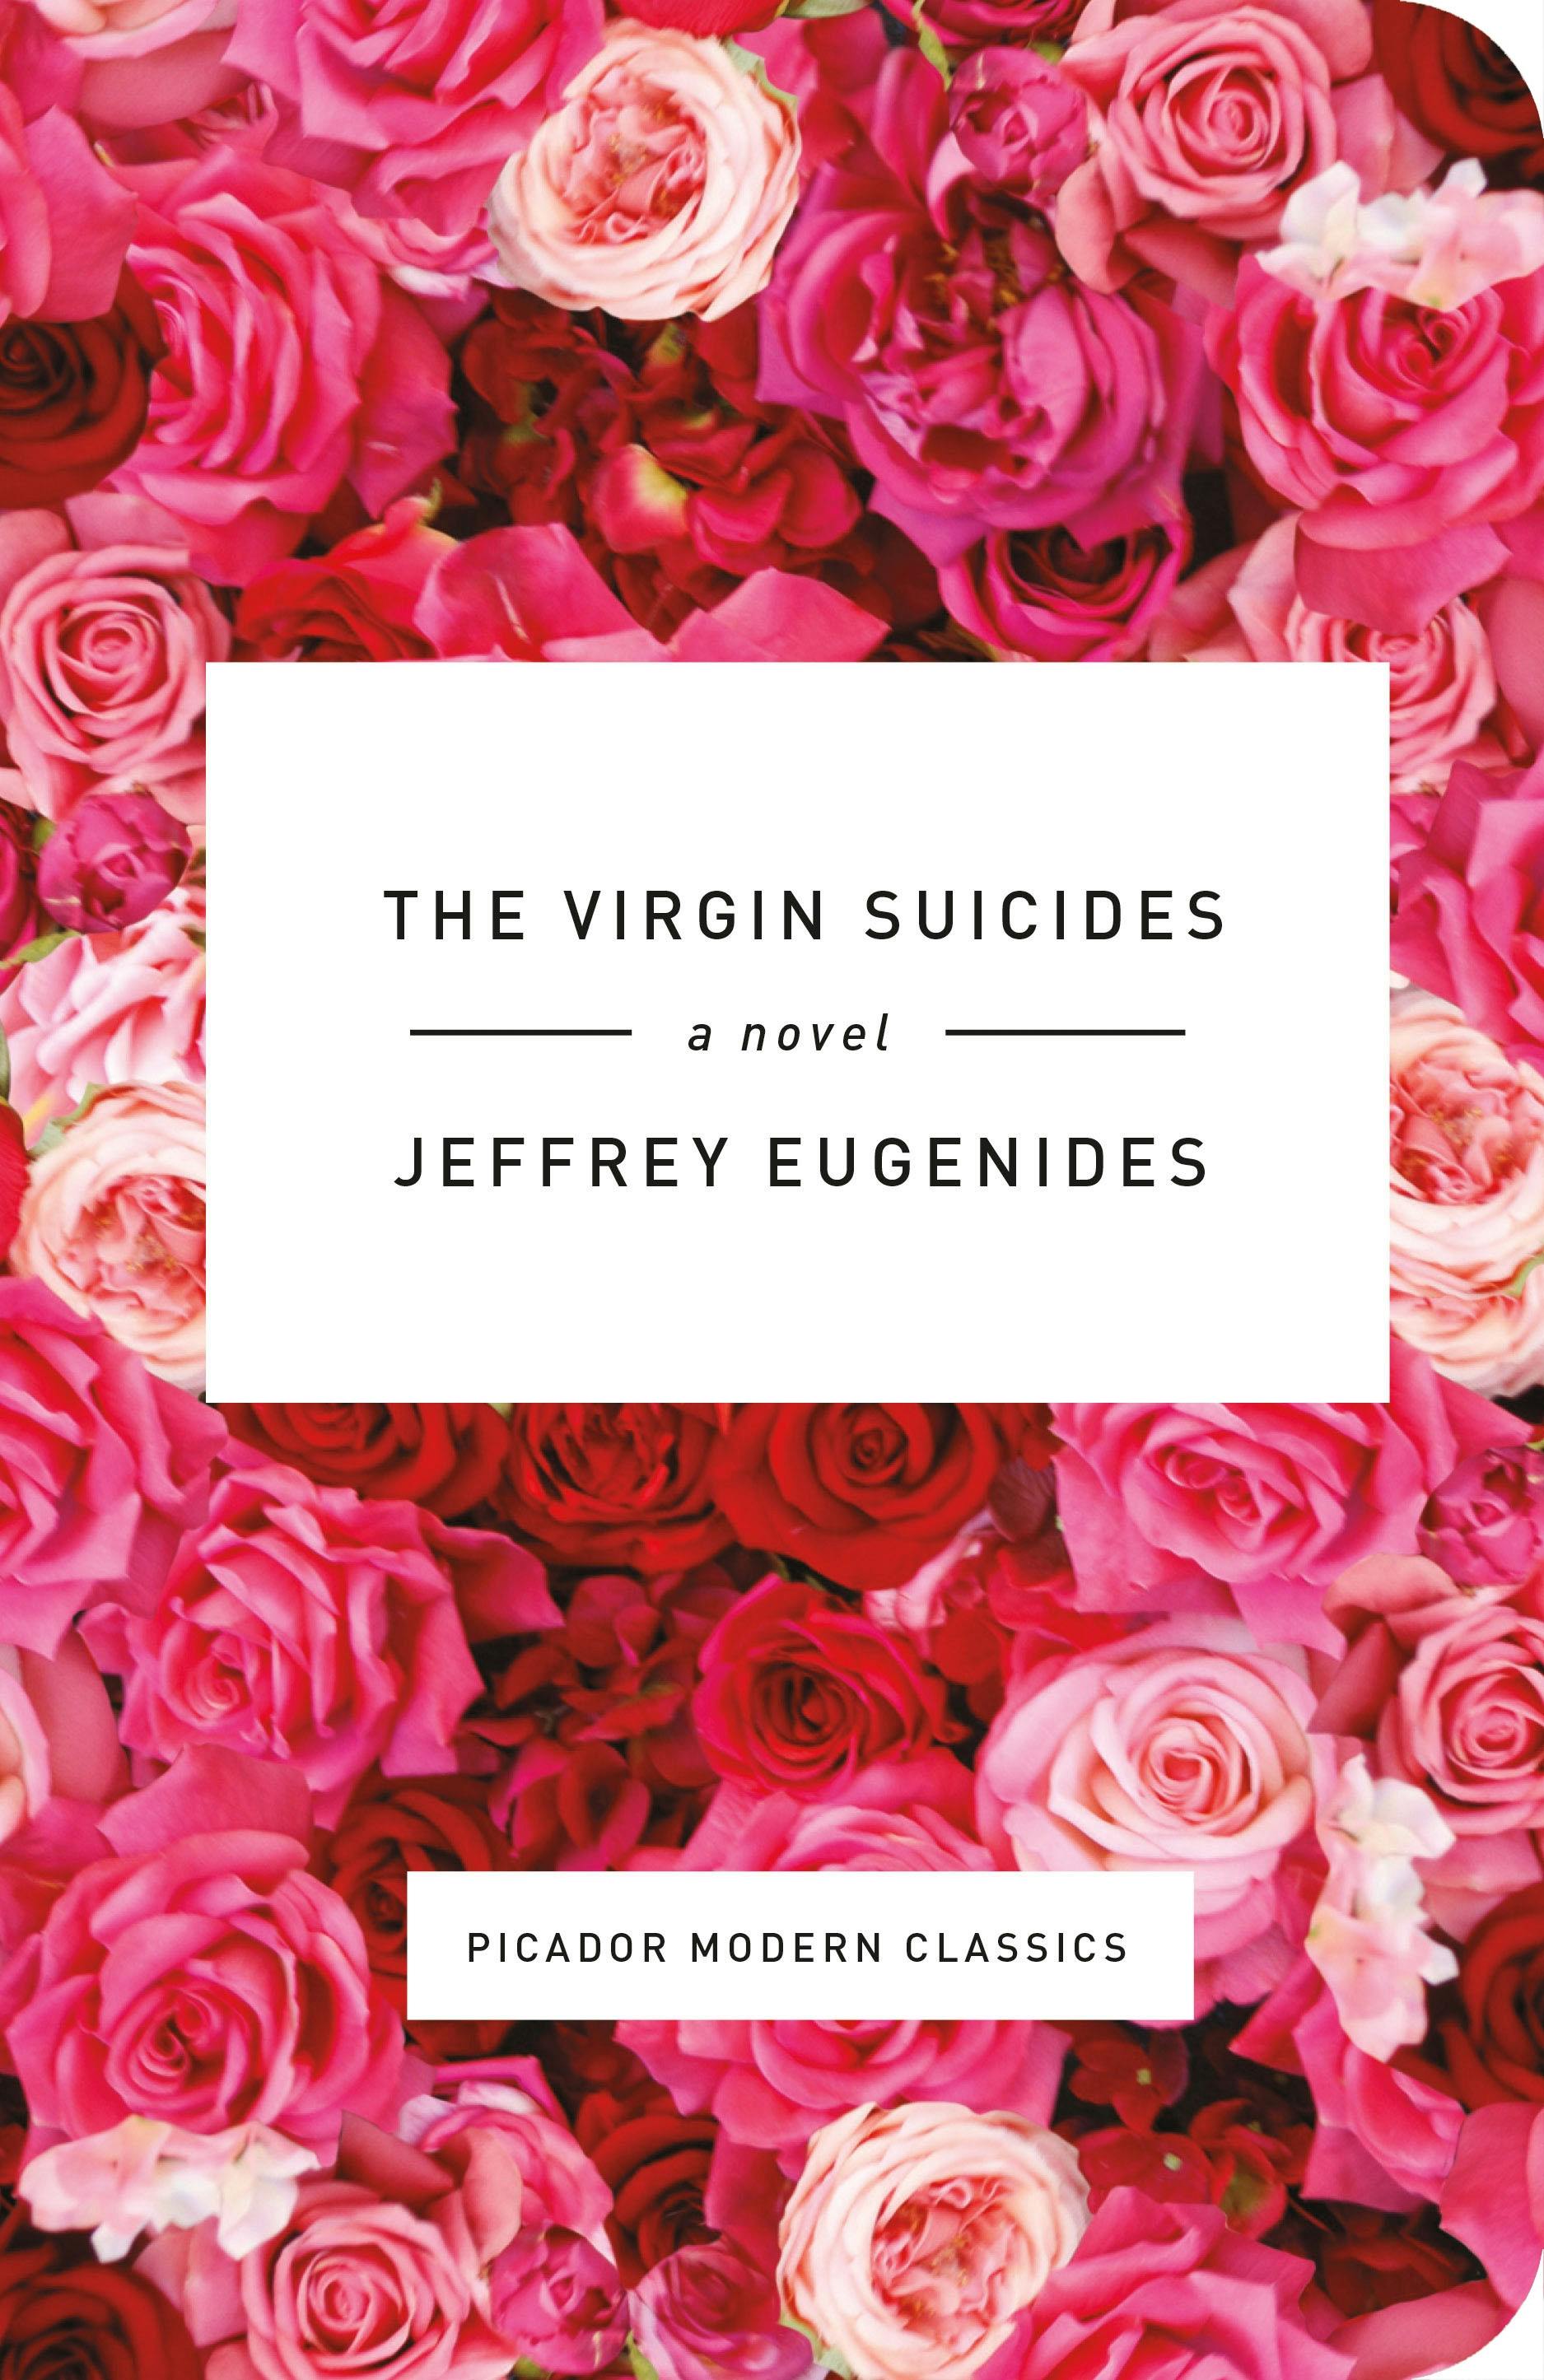 The Virgin Suicides photo picture pic